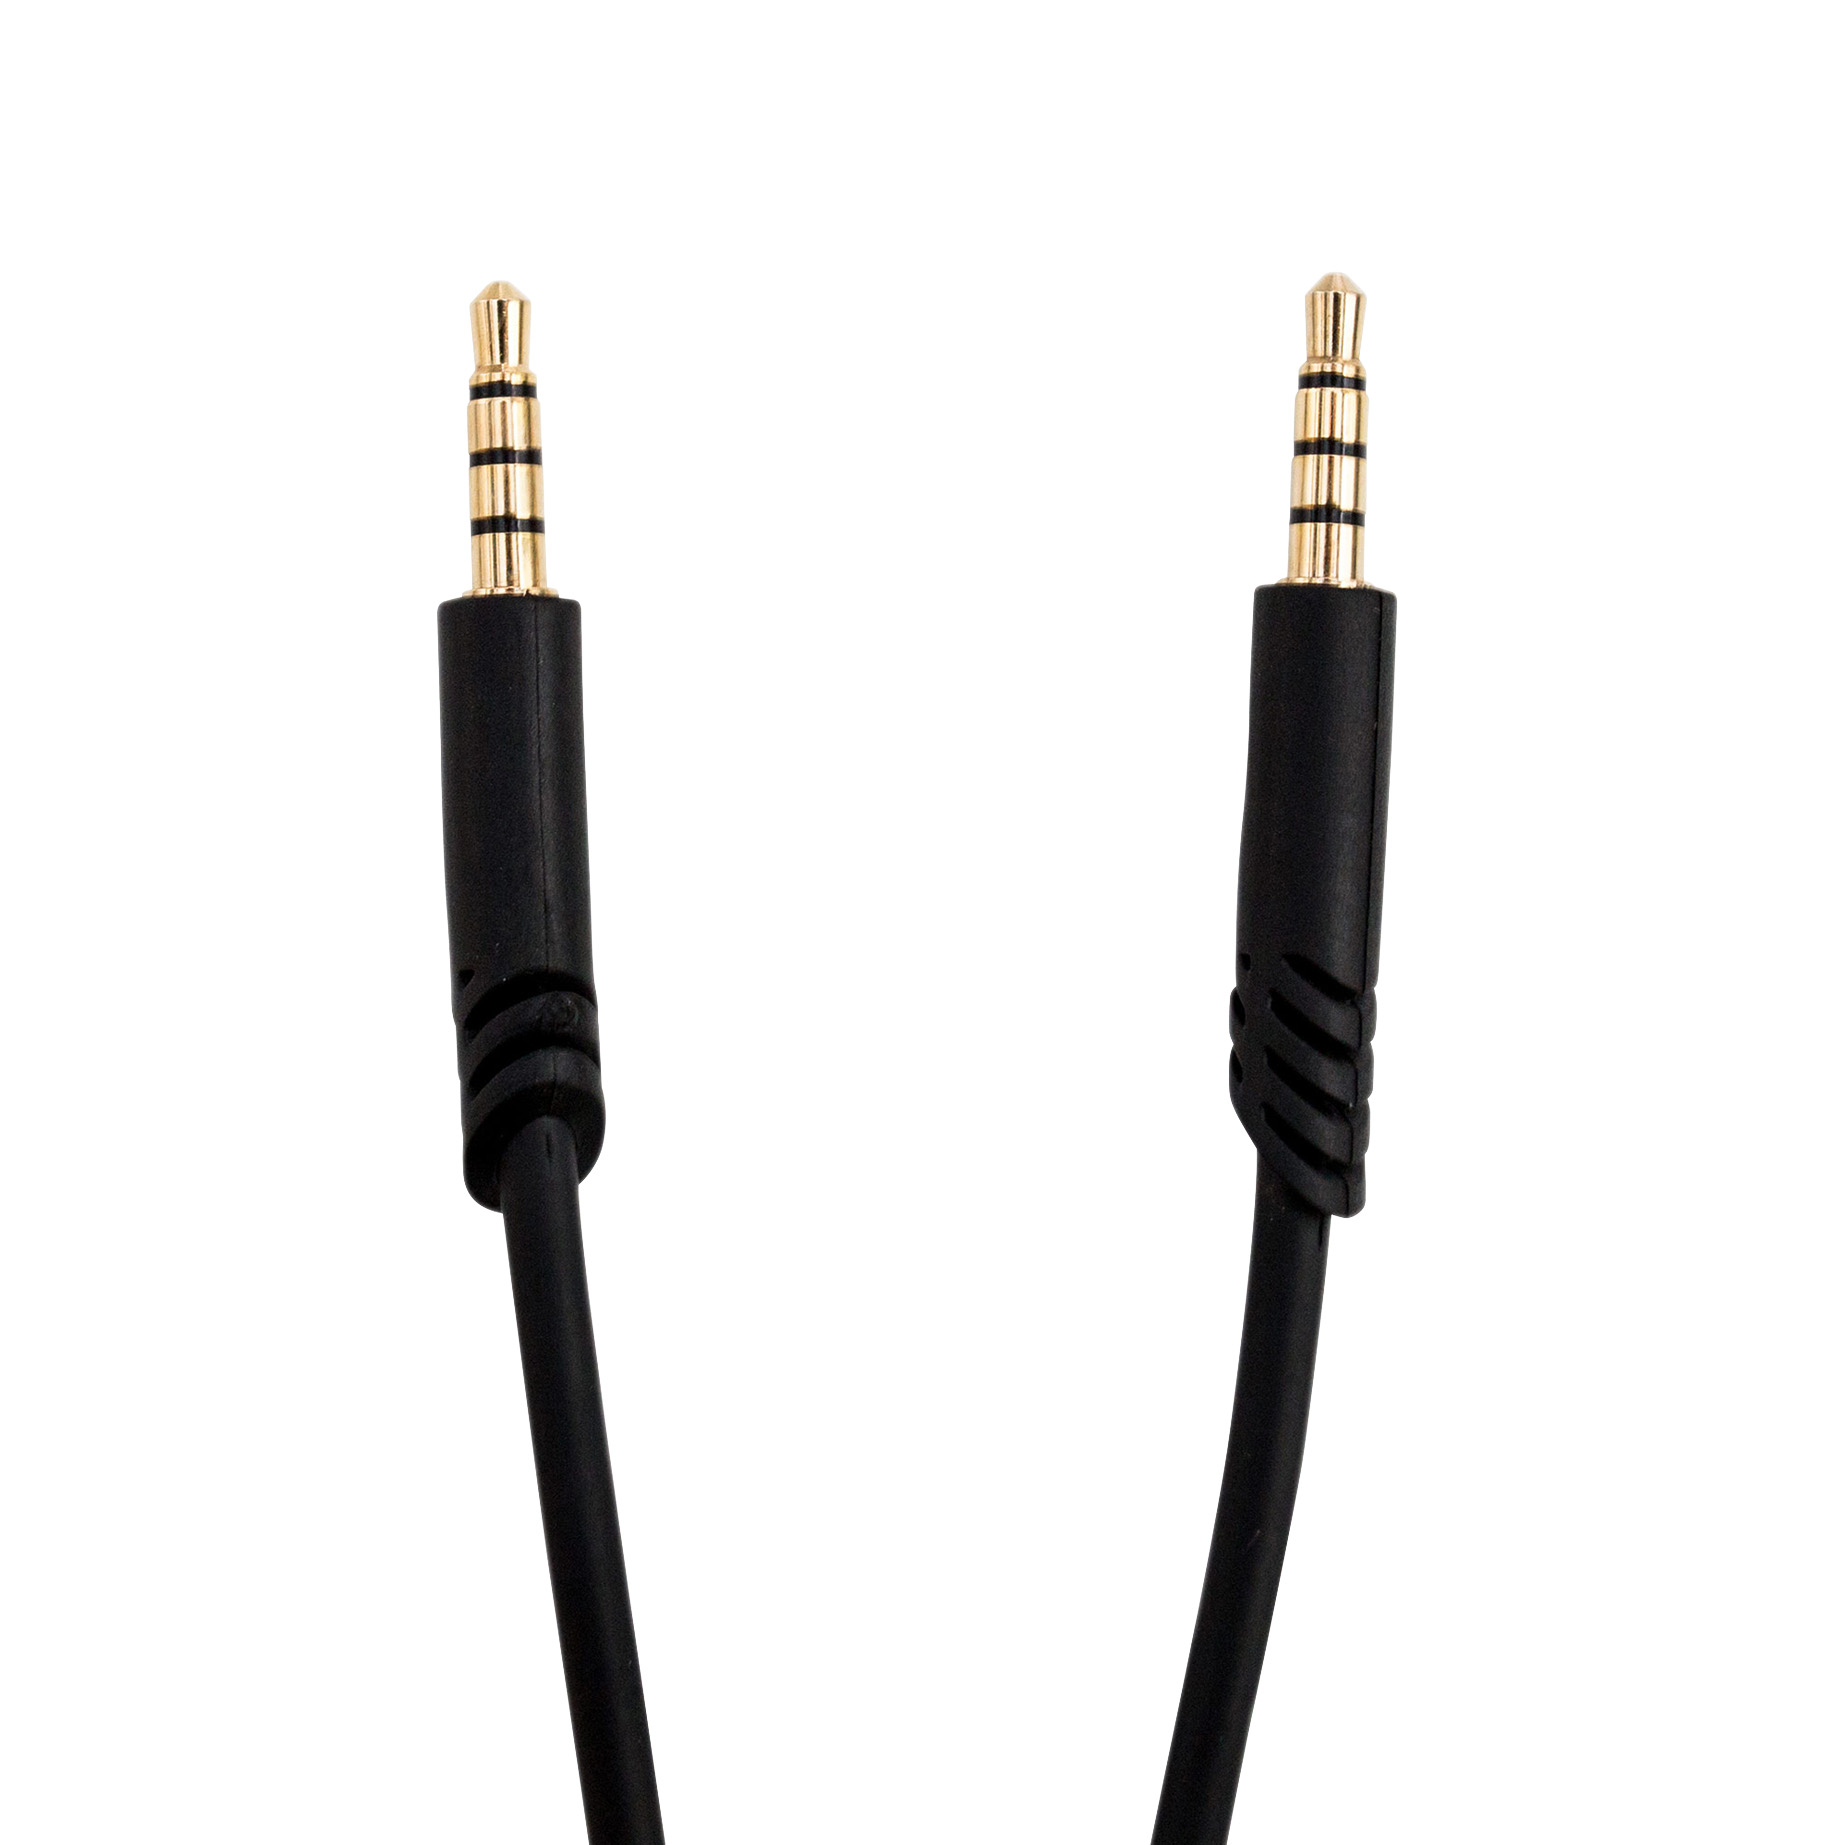 AUX CABLE & MIC  STEREO EARPHONES FOR MOBILE & MP3, Cable